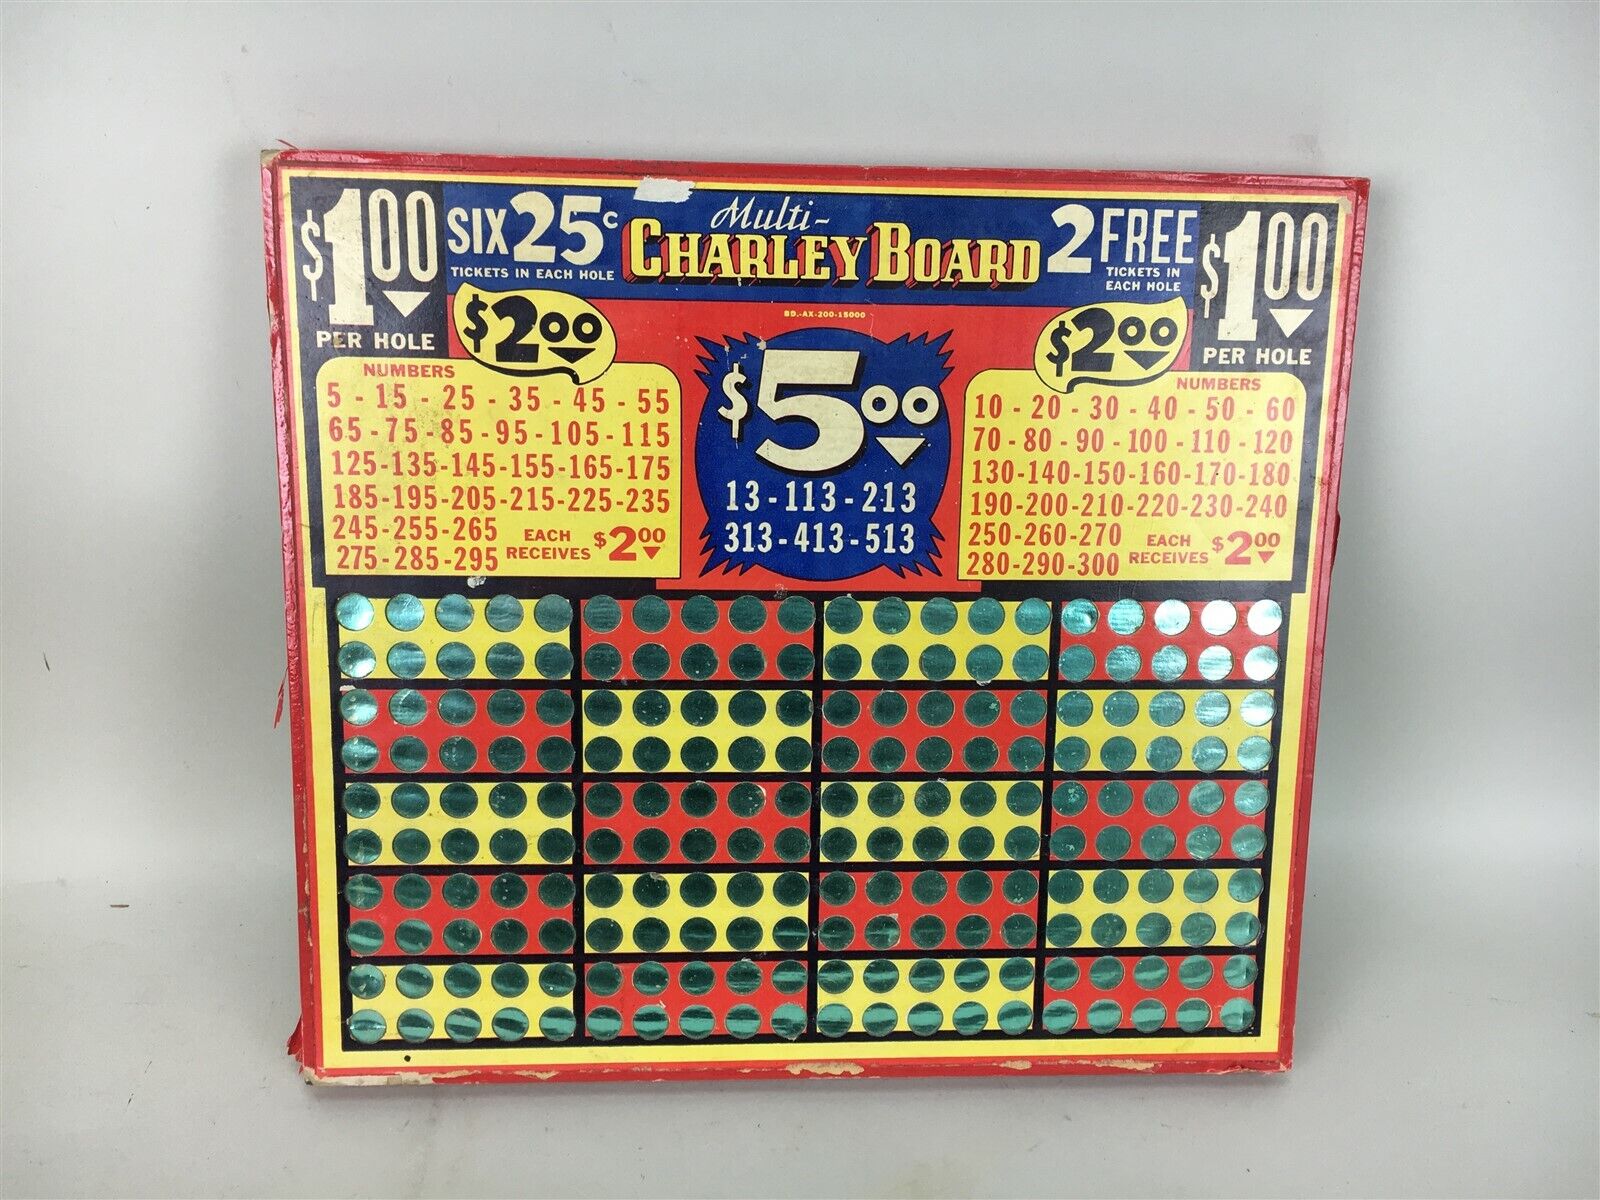 Vintage Unpunched Charley Board Multi Charley Punchboard $1 Per Hole